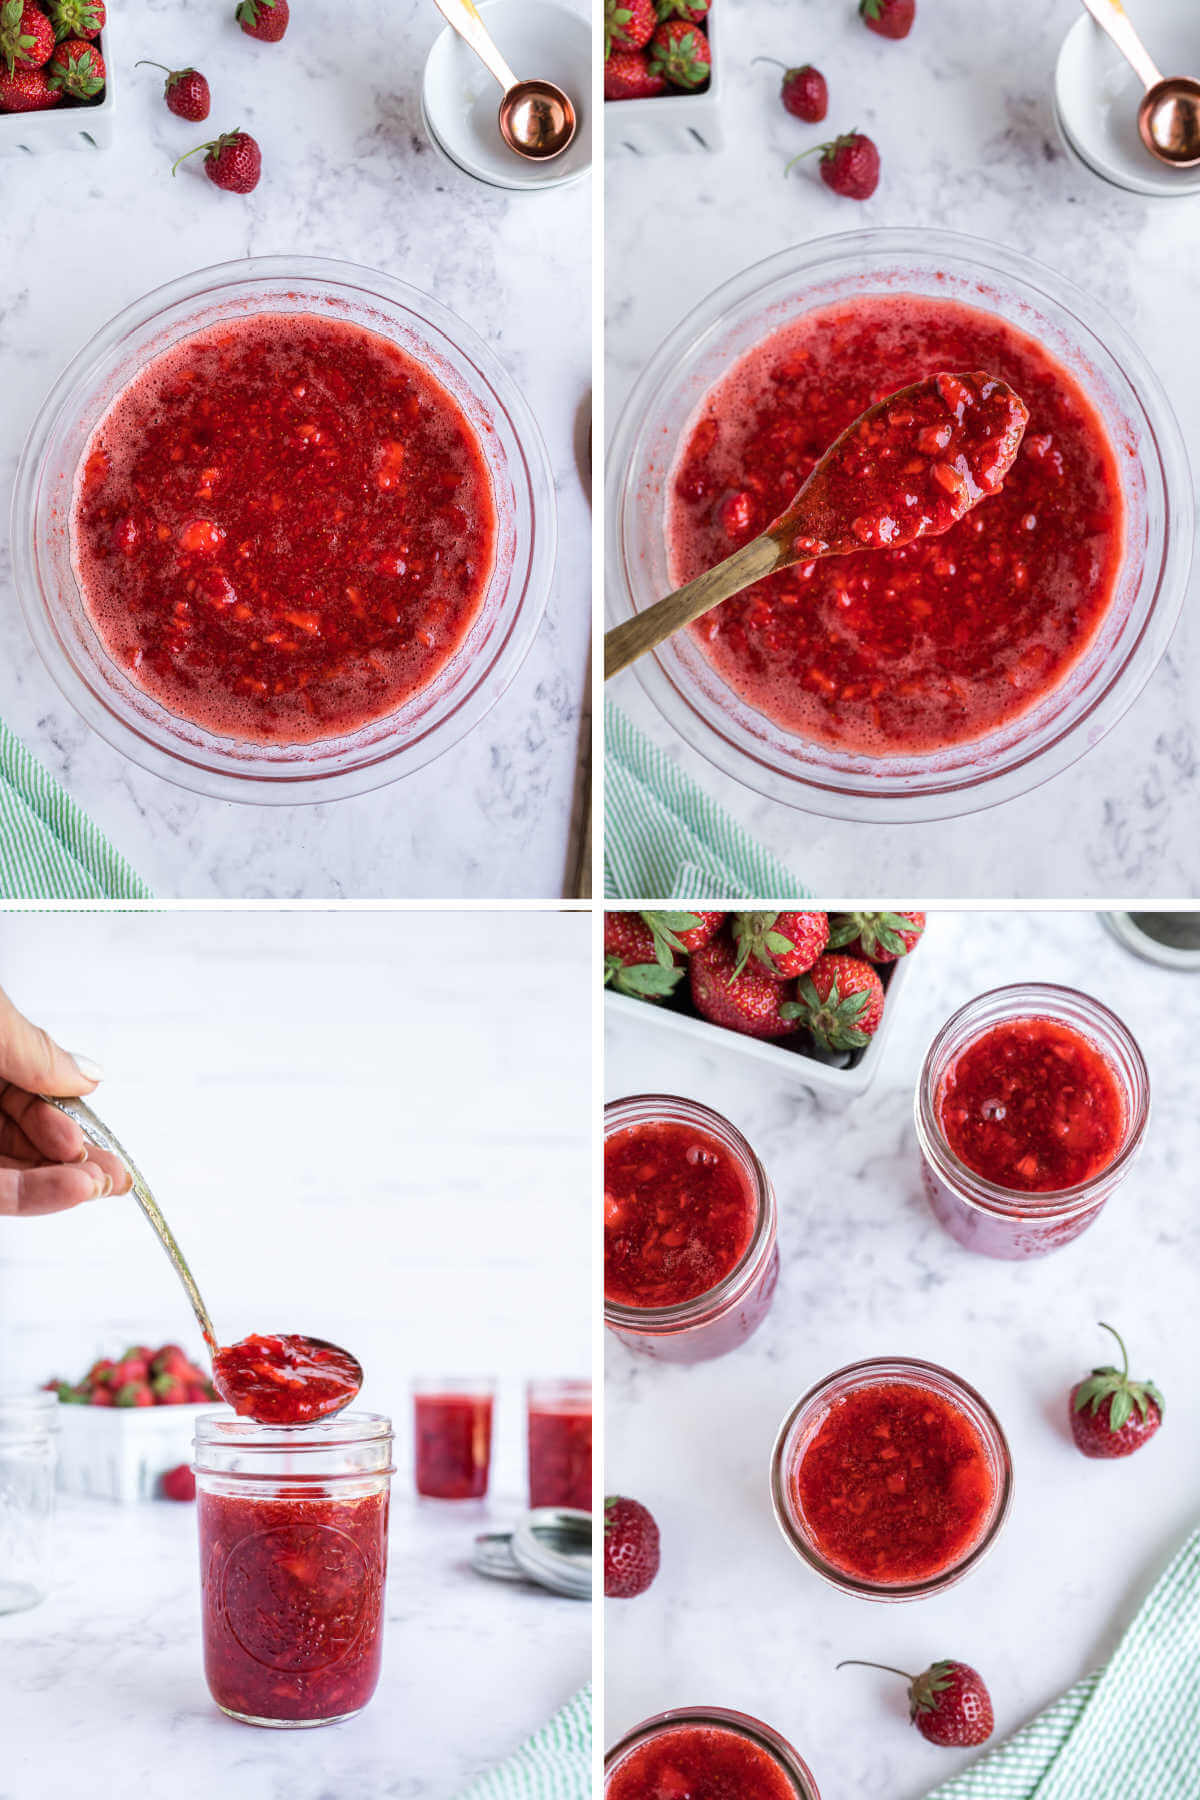 mixing the ingredients for strawberry jam in a bowl and ladling into jars for freezing.